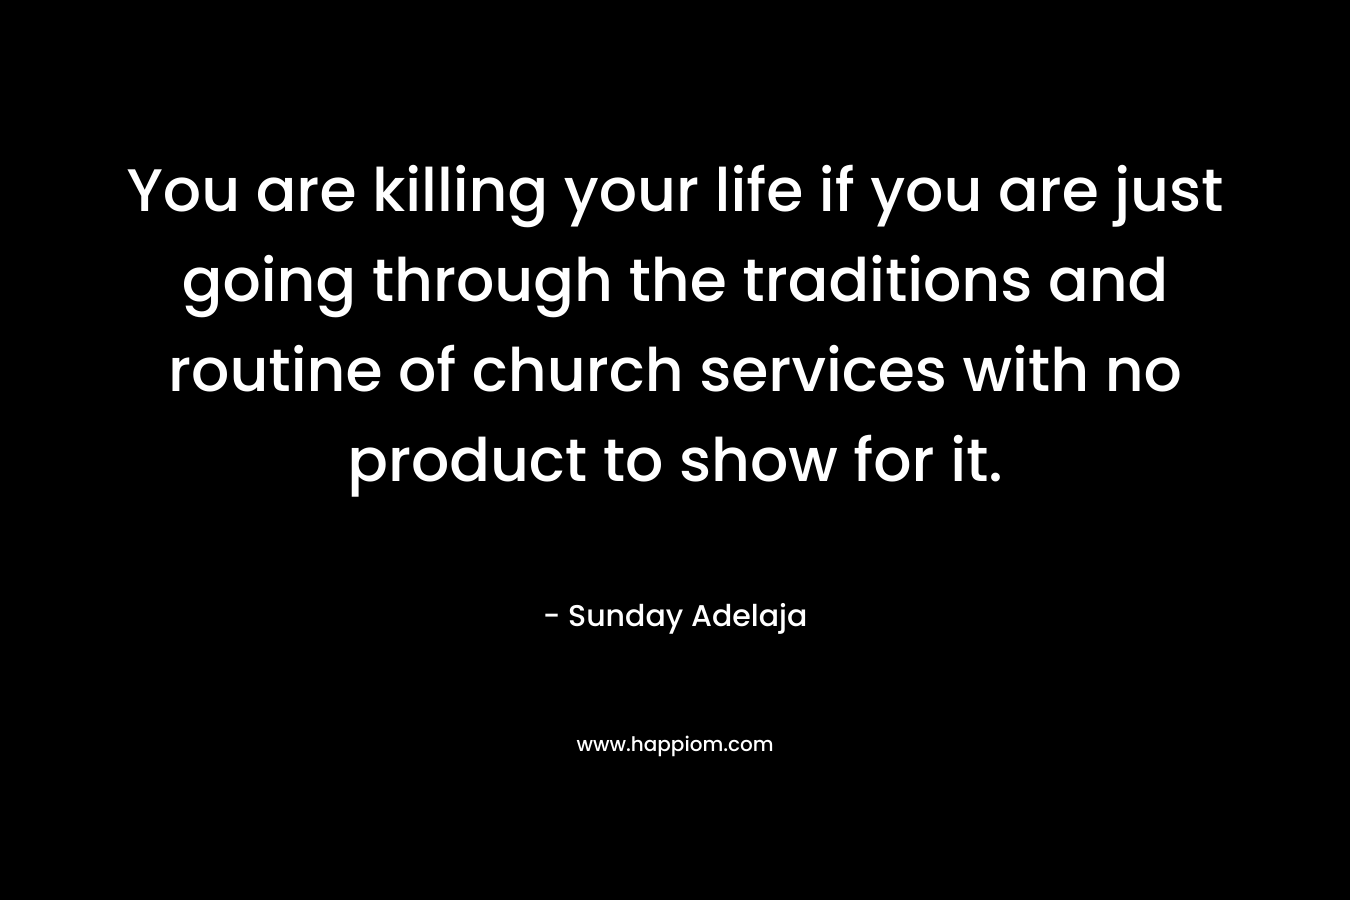 You are killing your life if you are just going through the traditions and routine of church services with no product to show for it.